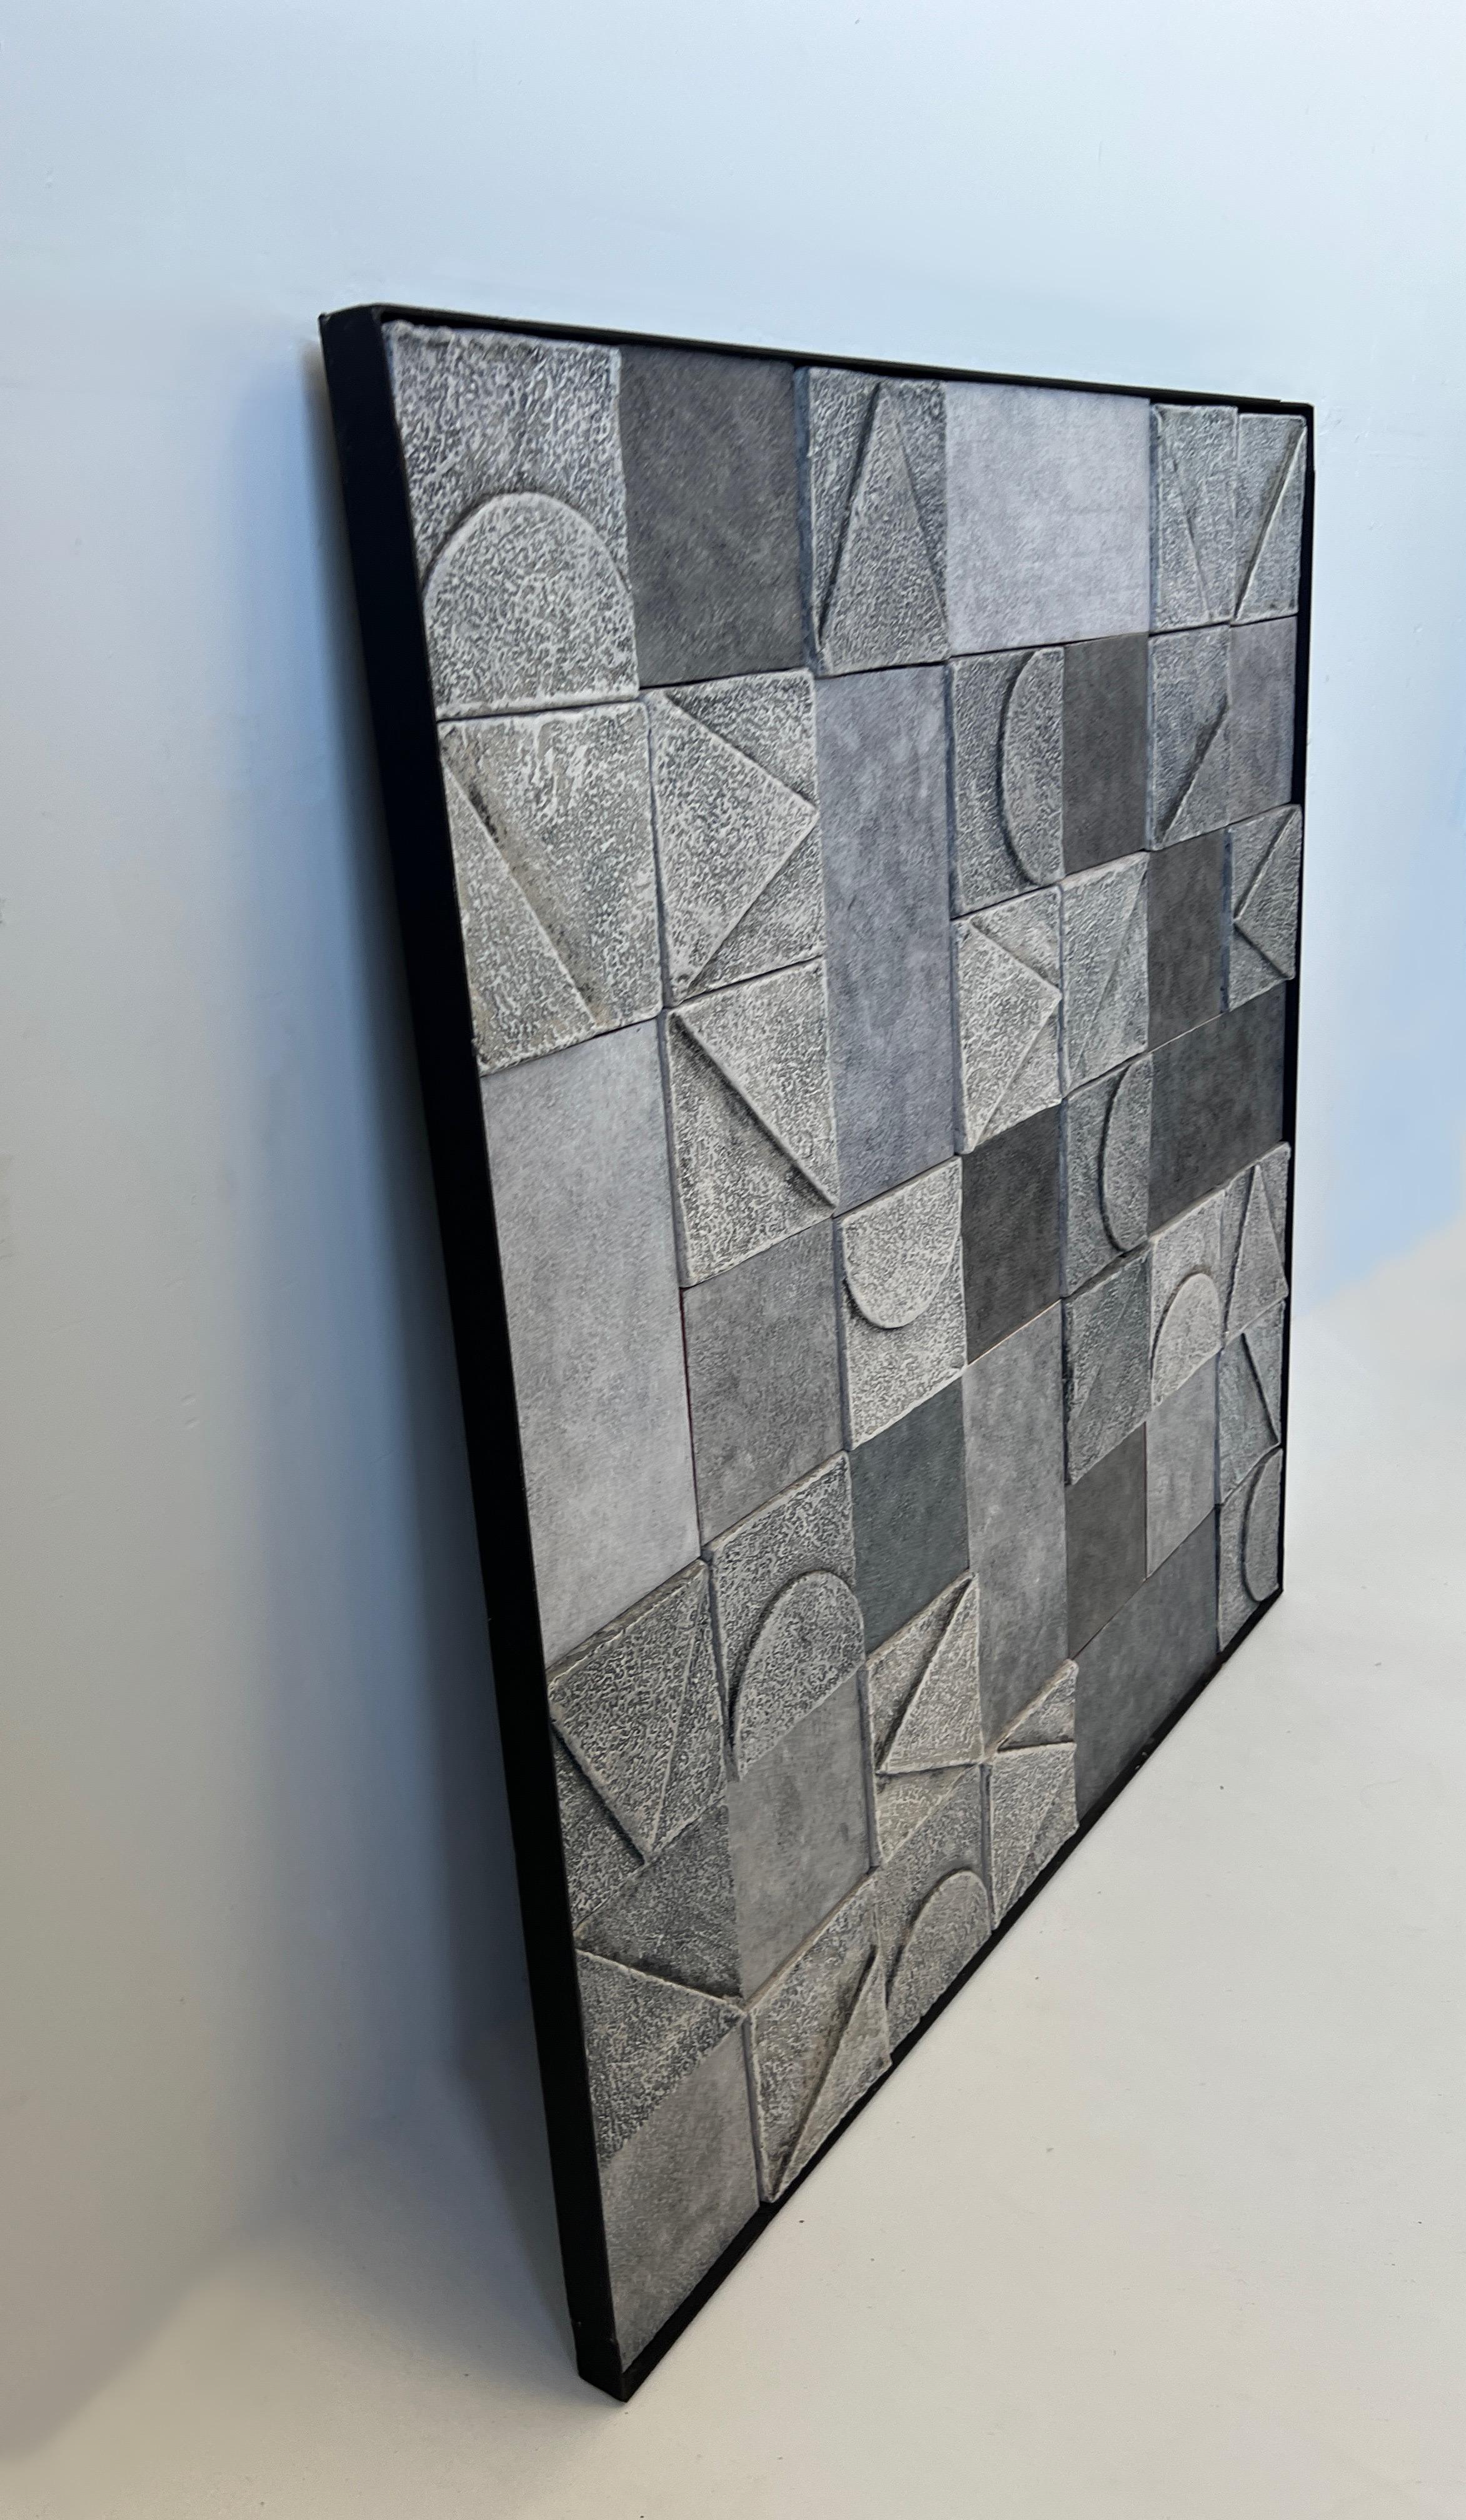 Beautiful studio ceramic glazed abstract mural. 
The glaze is gray tones colors. 
Black lacquered steel frame. 
Measurements: 39.63” wide 39.63” high, 1.25” deep.